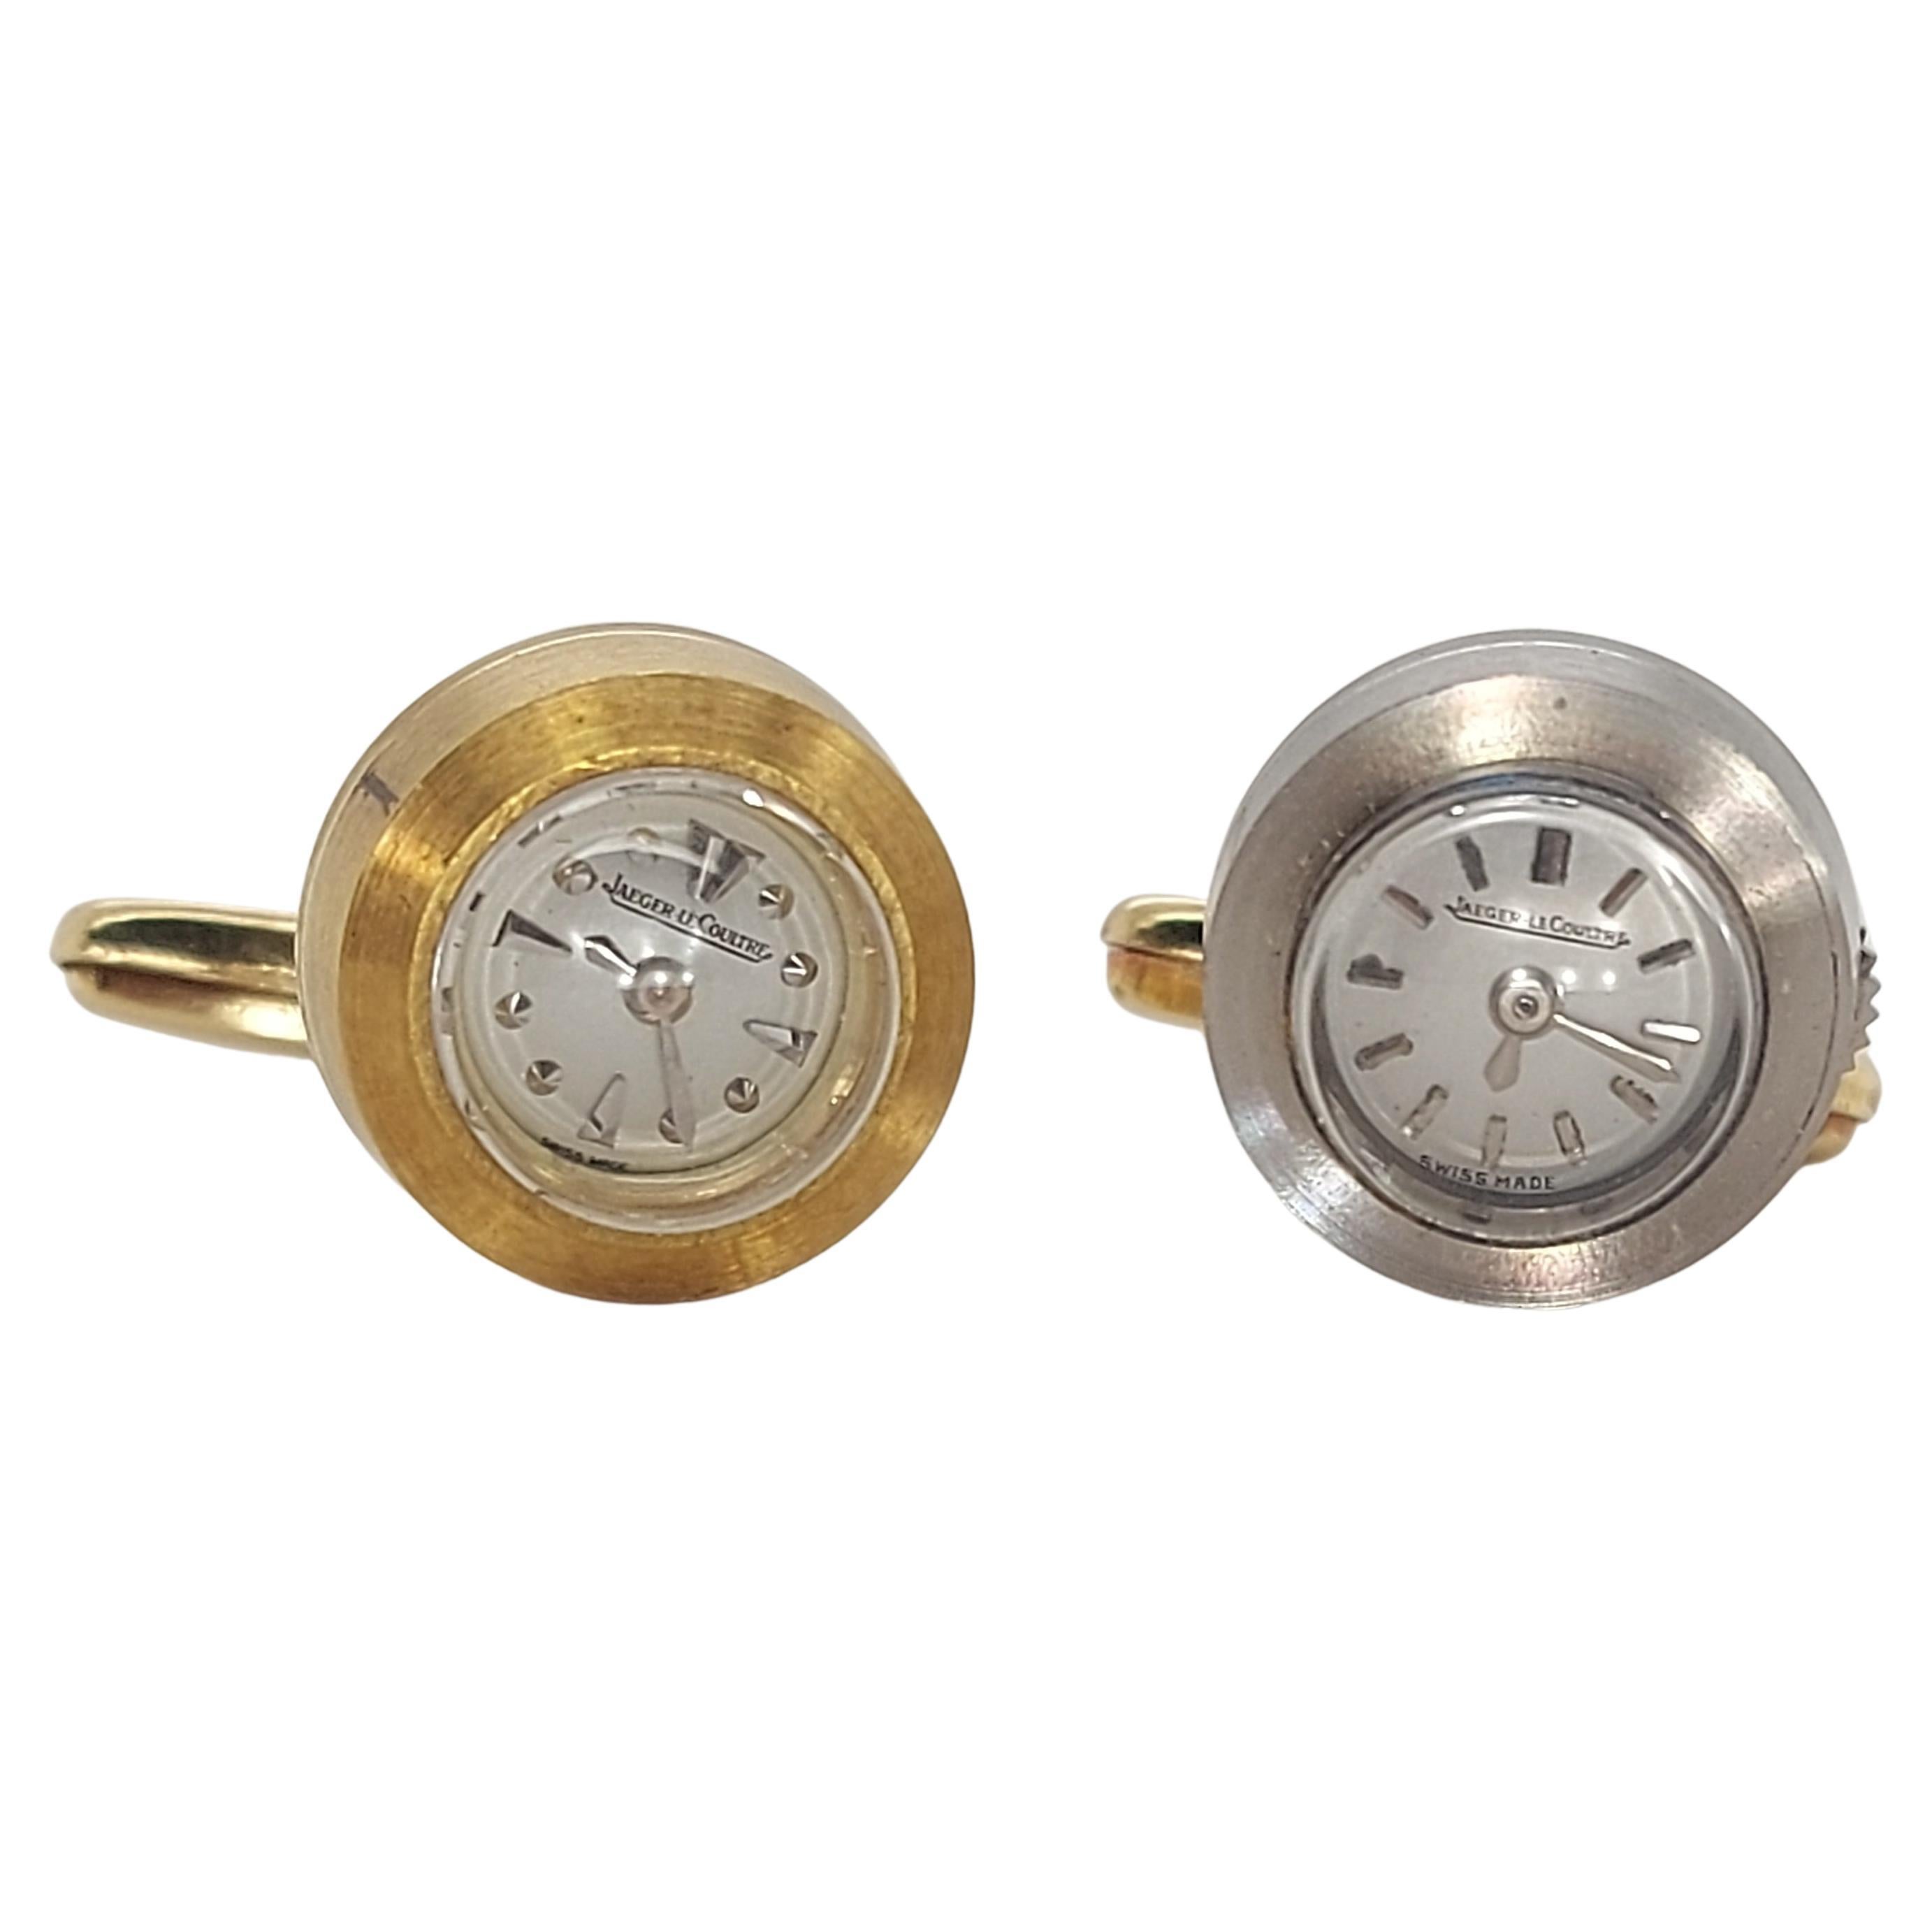 18kt Yellow  & White Gold Jaeger Le Coultre Backwinder Watch Cufflinks 

Material: 18kt white gold

Measurements: Diameter 13.4mm x 34.8 mm, Length cufflink folded 27.5mm 

Movement : Mechanical Manual Backwinder

Total weight: 15.2 gram / 0.535 oz